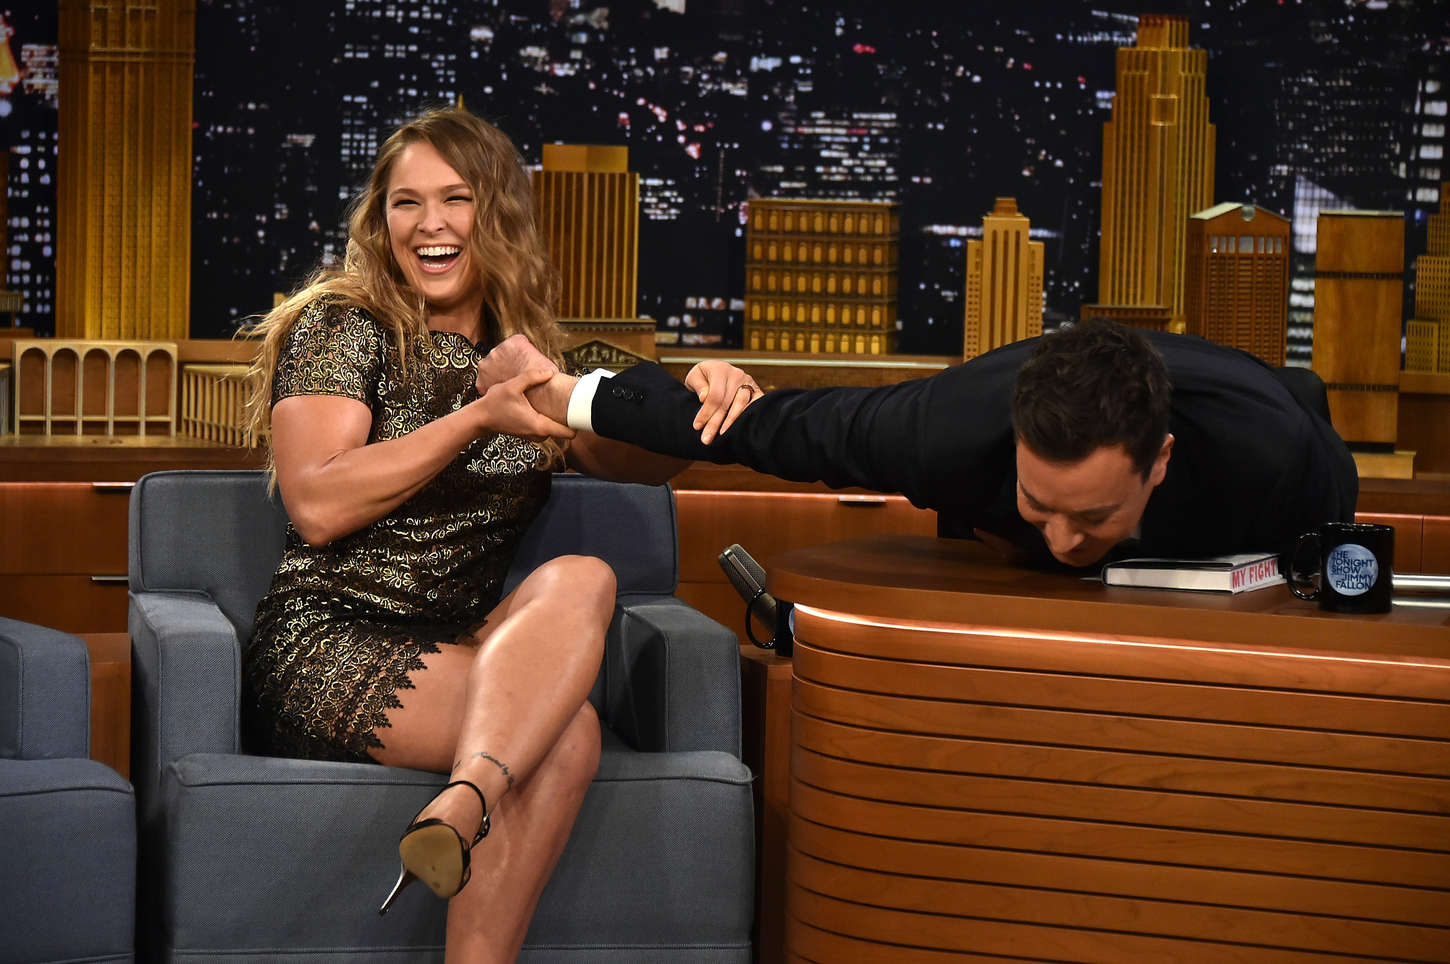 Ronda-Rousey-Leggy-at-The-Tonight-Show-With-Jimmy-Fallon--07.jpg